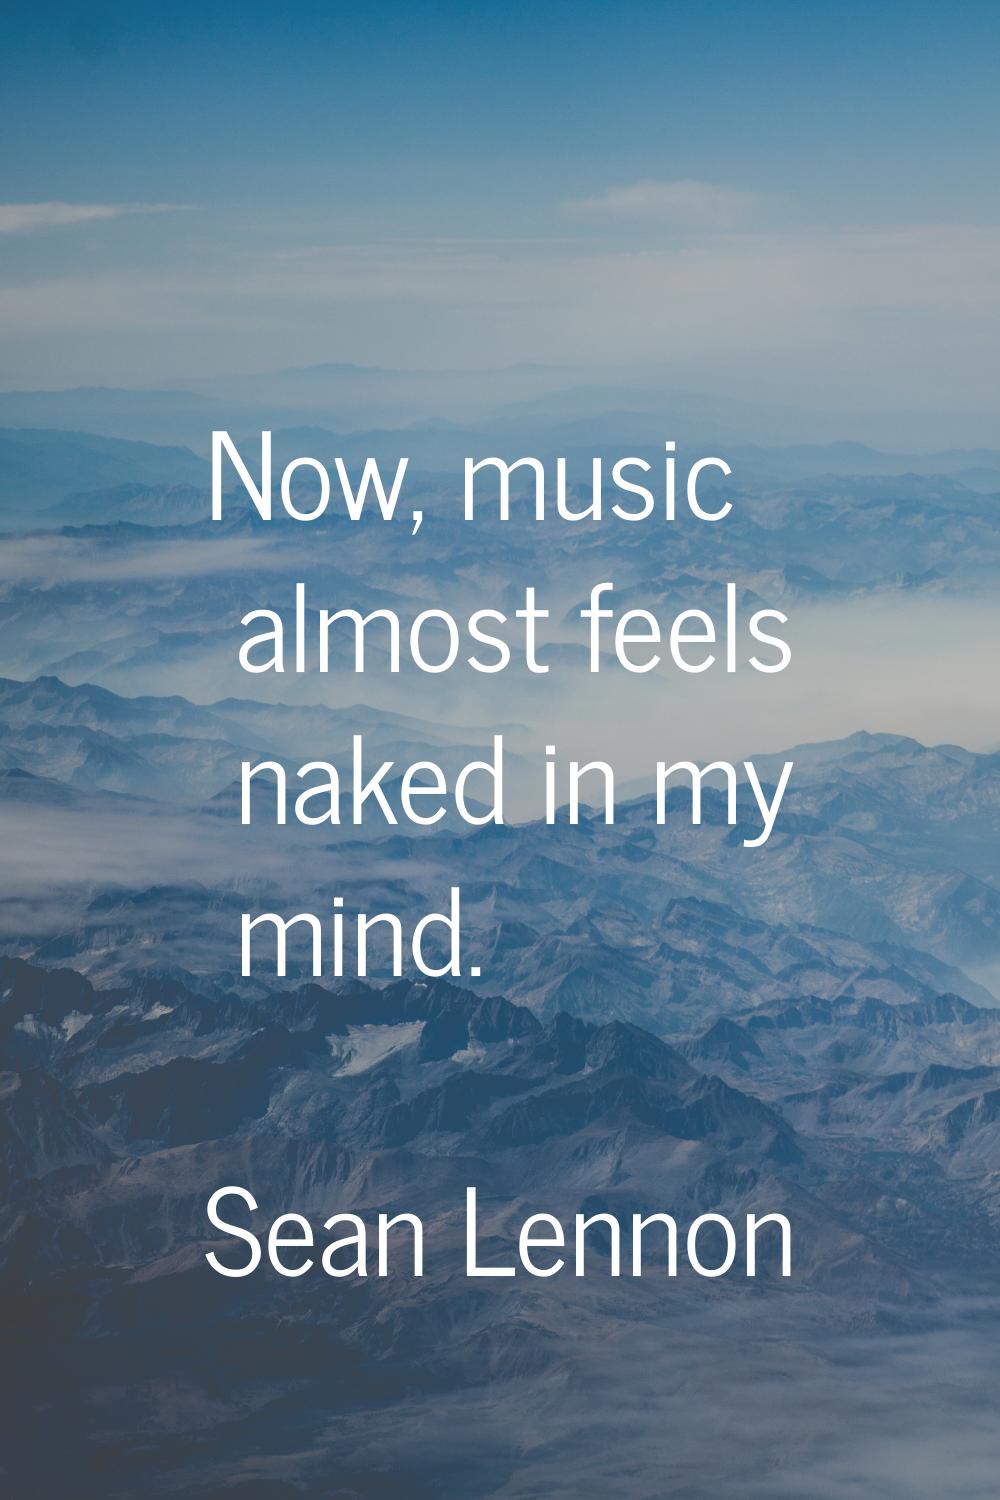 Now, music almost feels naked in my mind.